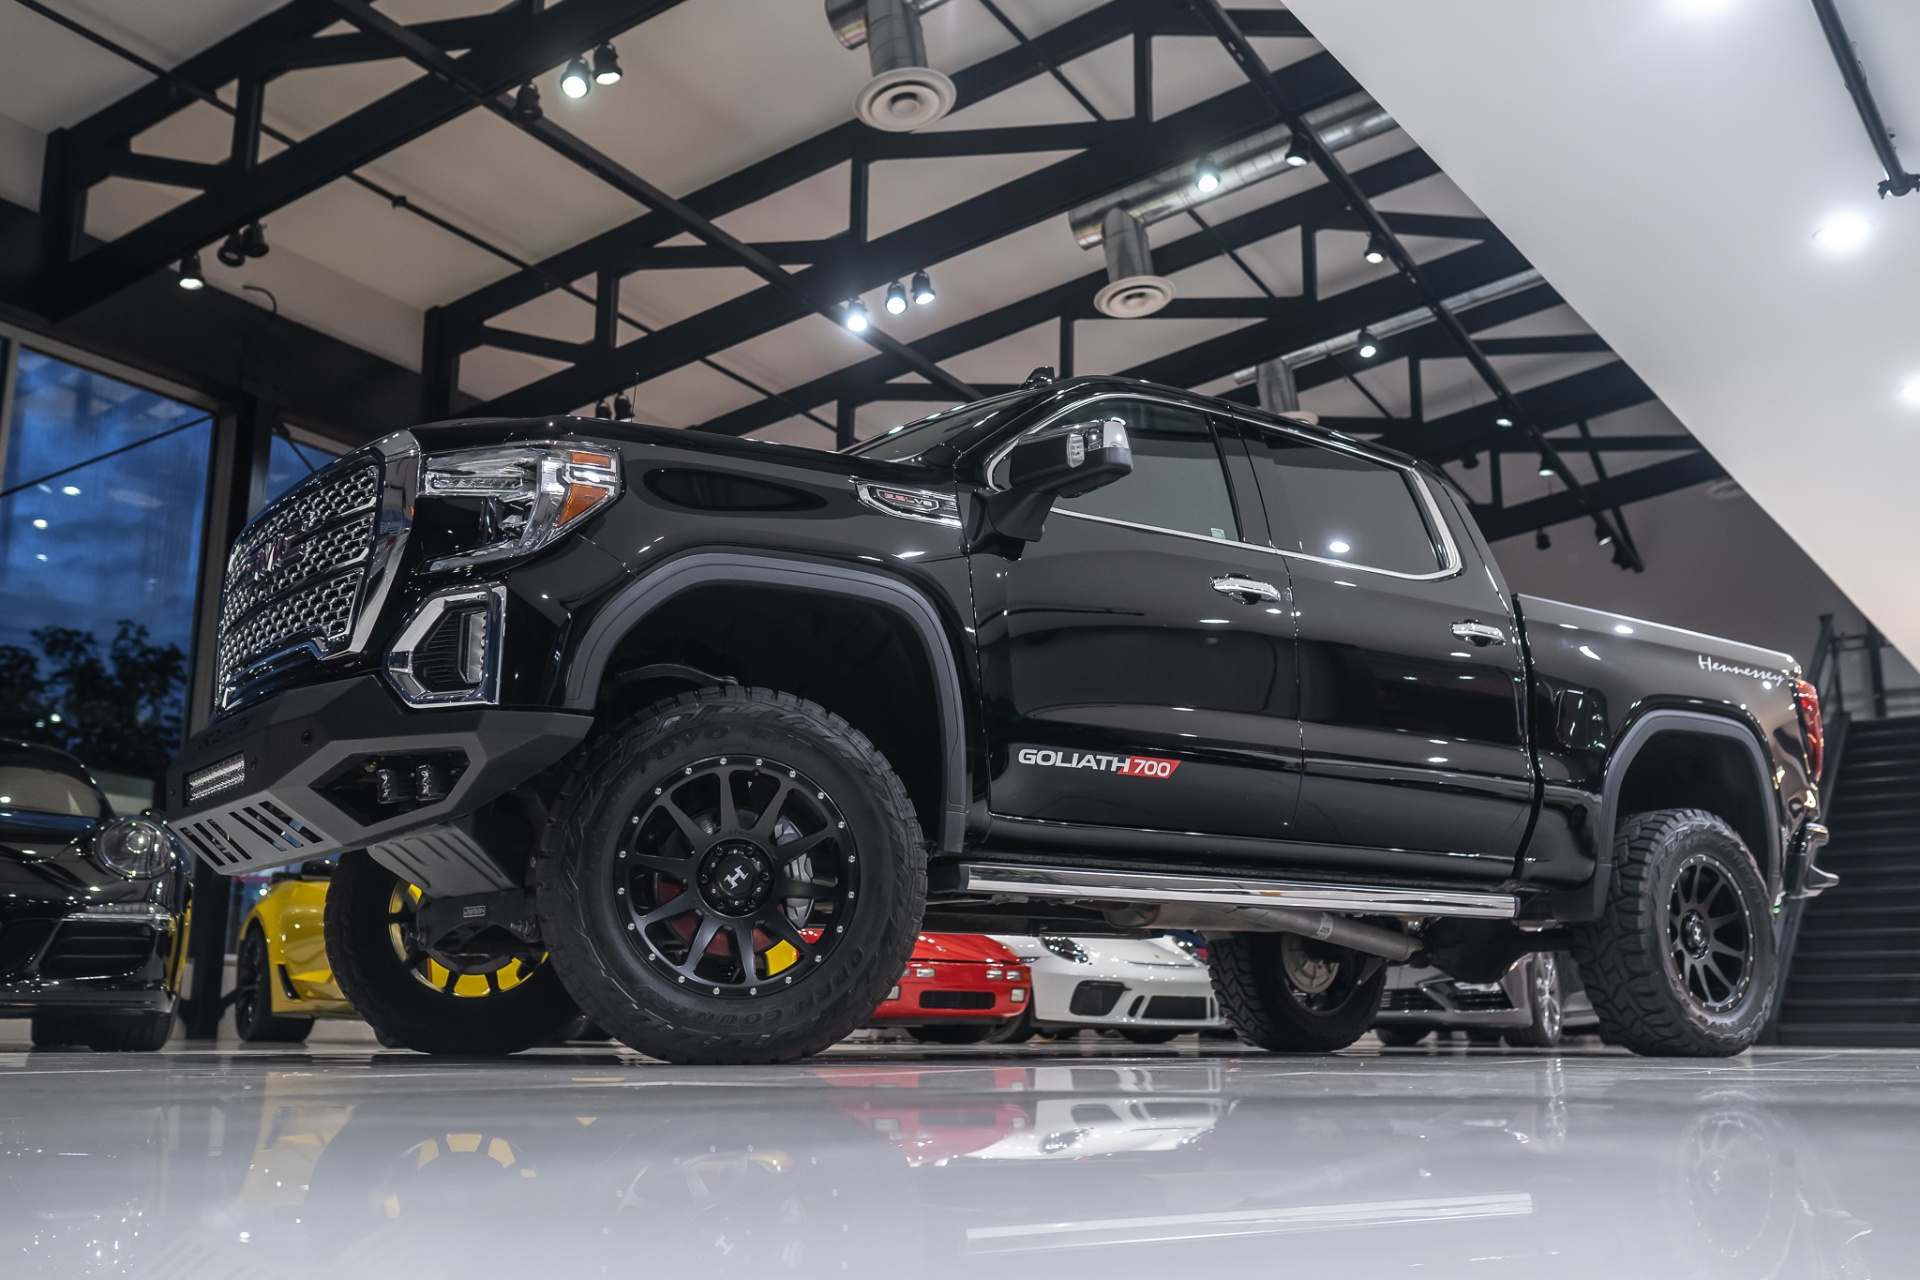 Used-2021-GMC-Sierra-1500-Denali-4WD-HENNESSEY-Goliath-700-Supercharged-Pkg